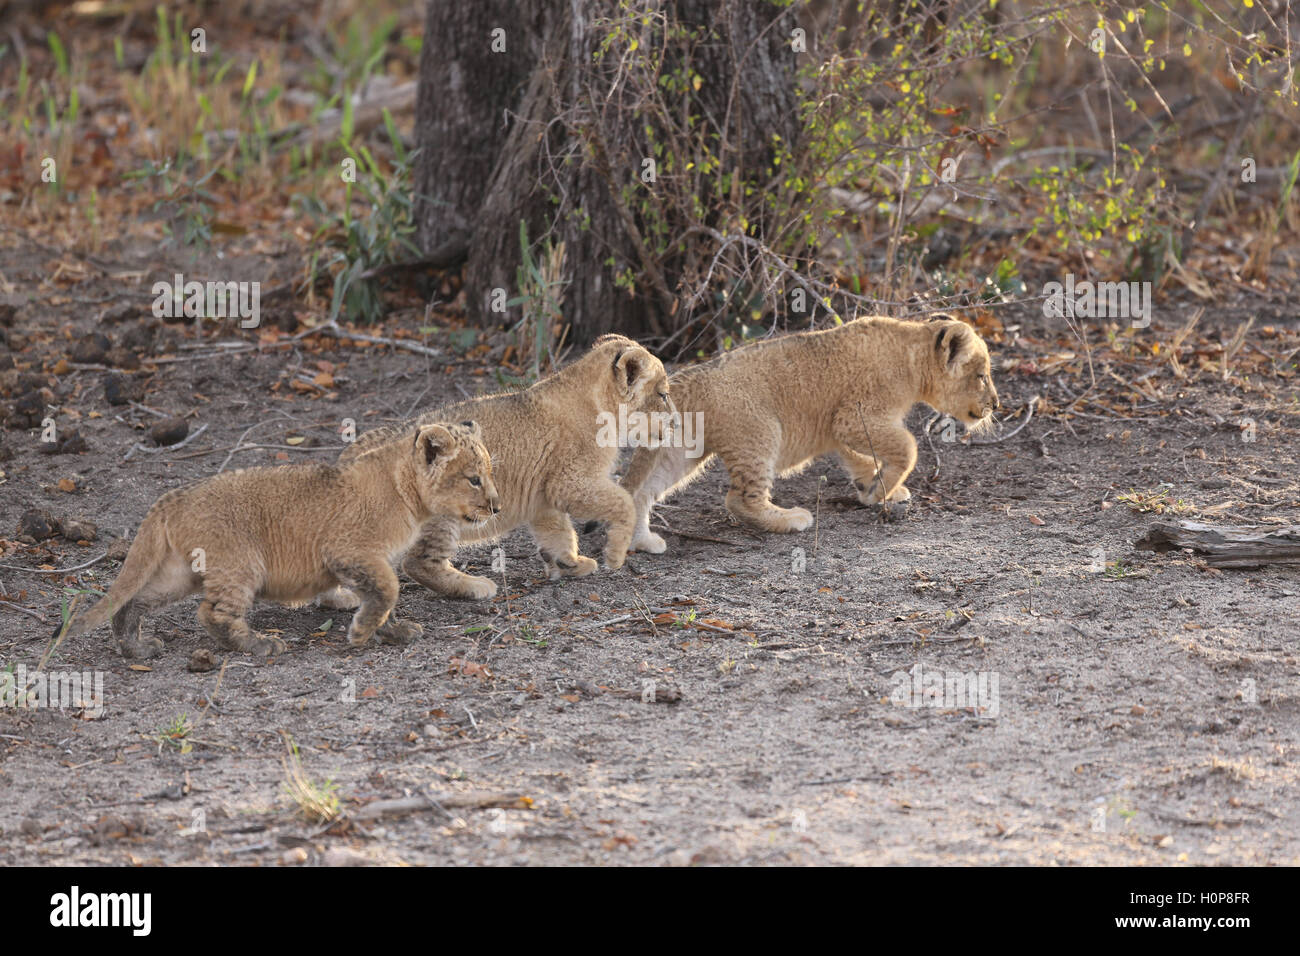 Three lion cub siblings walking together Stock Photo